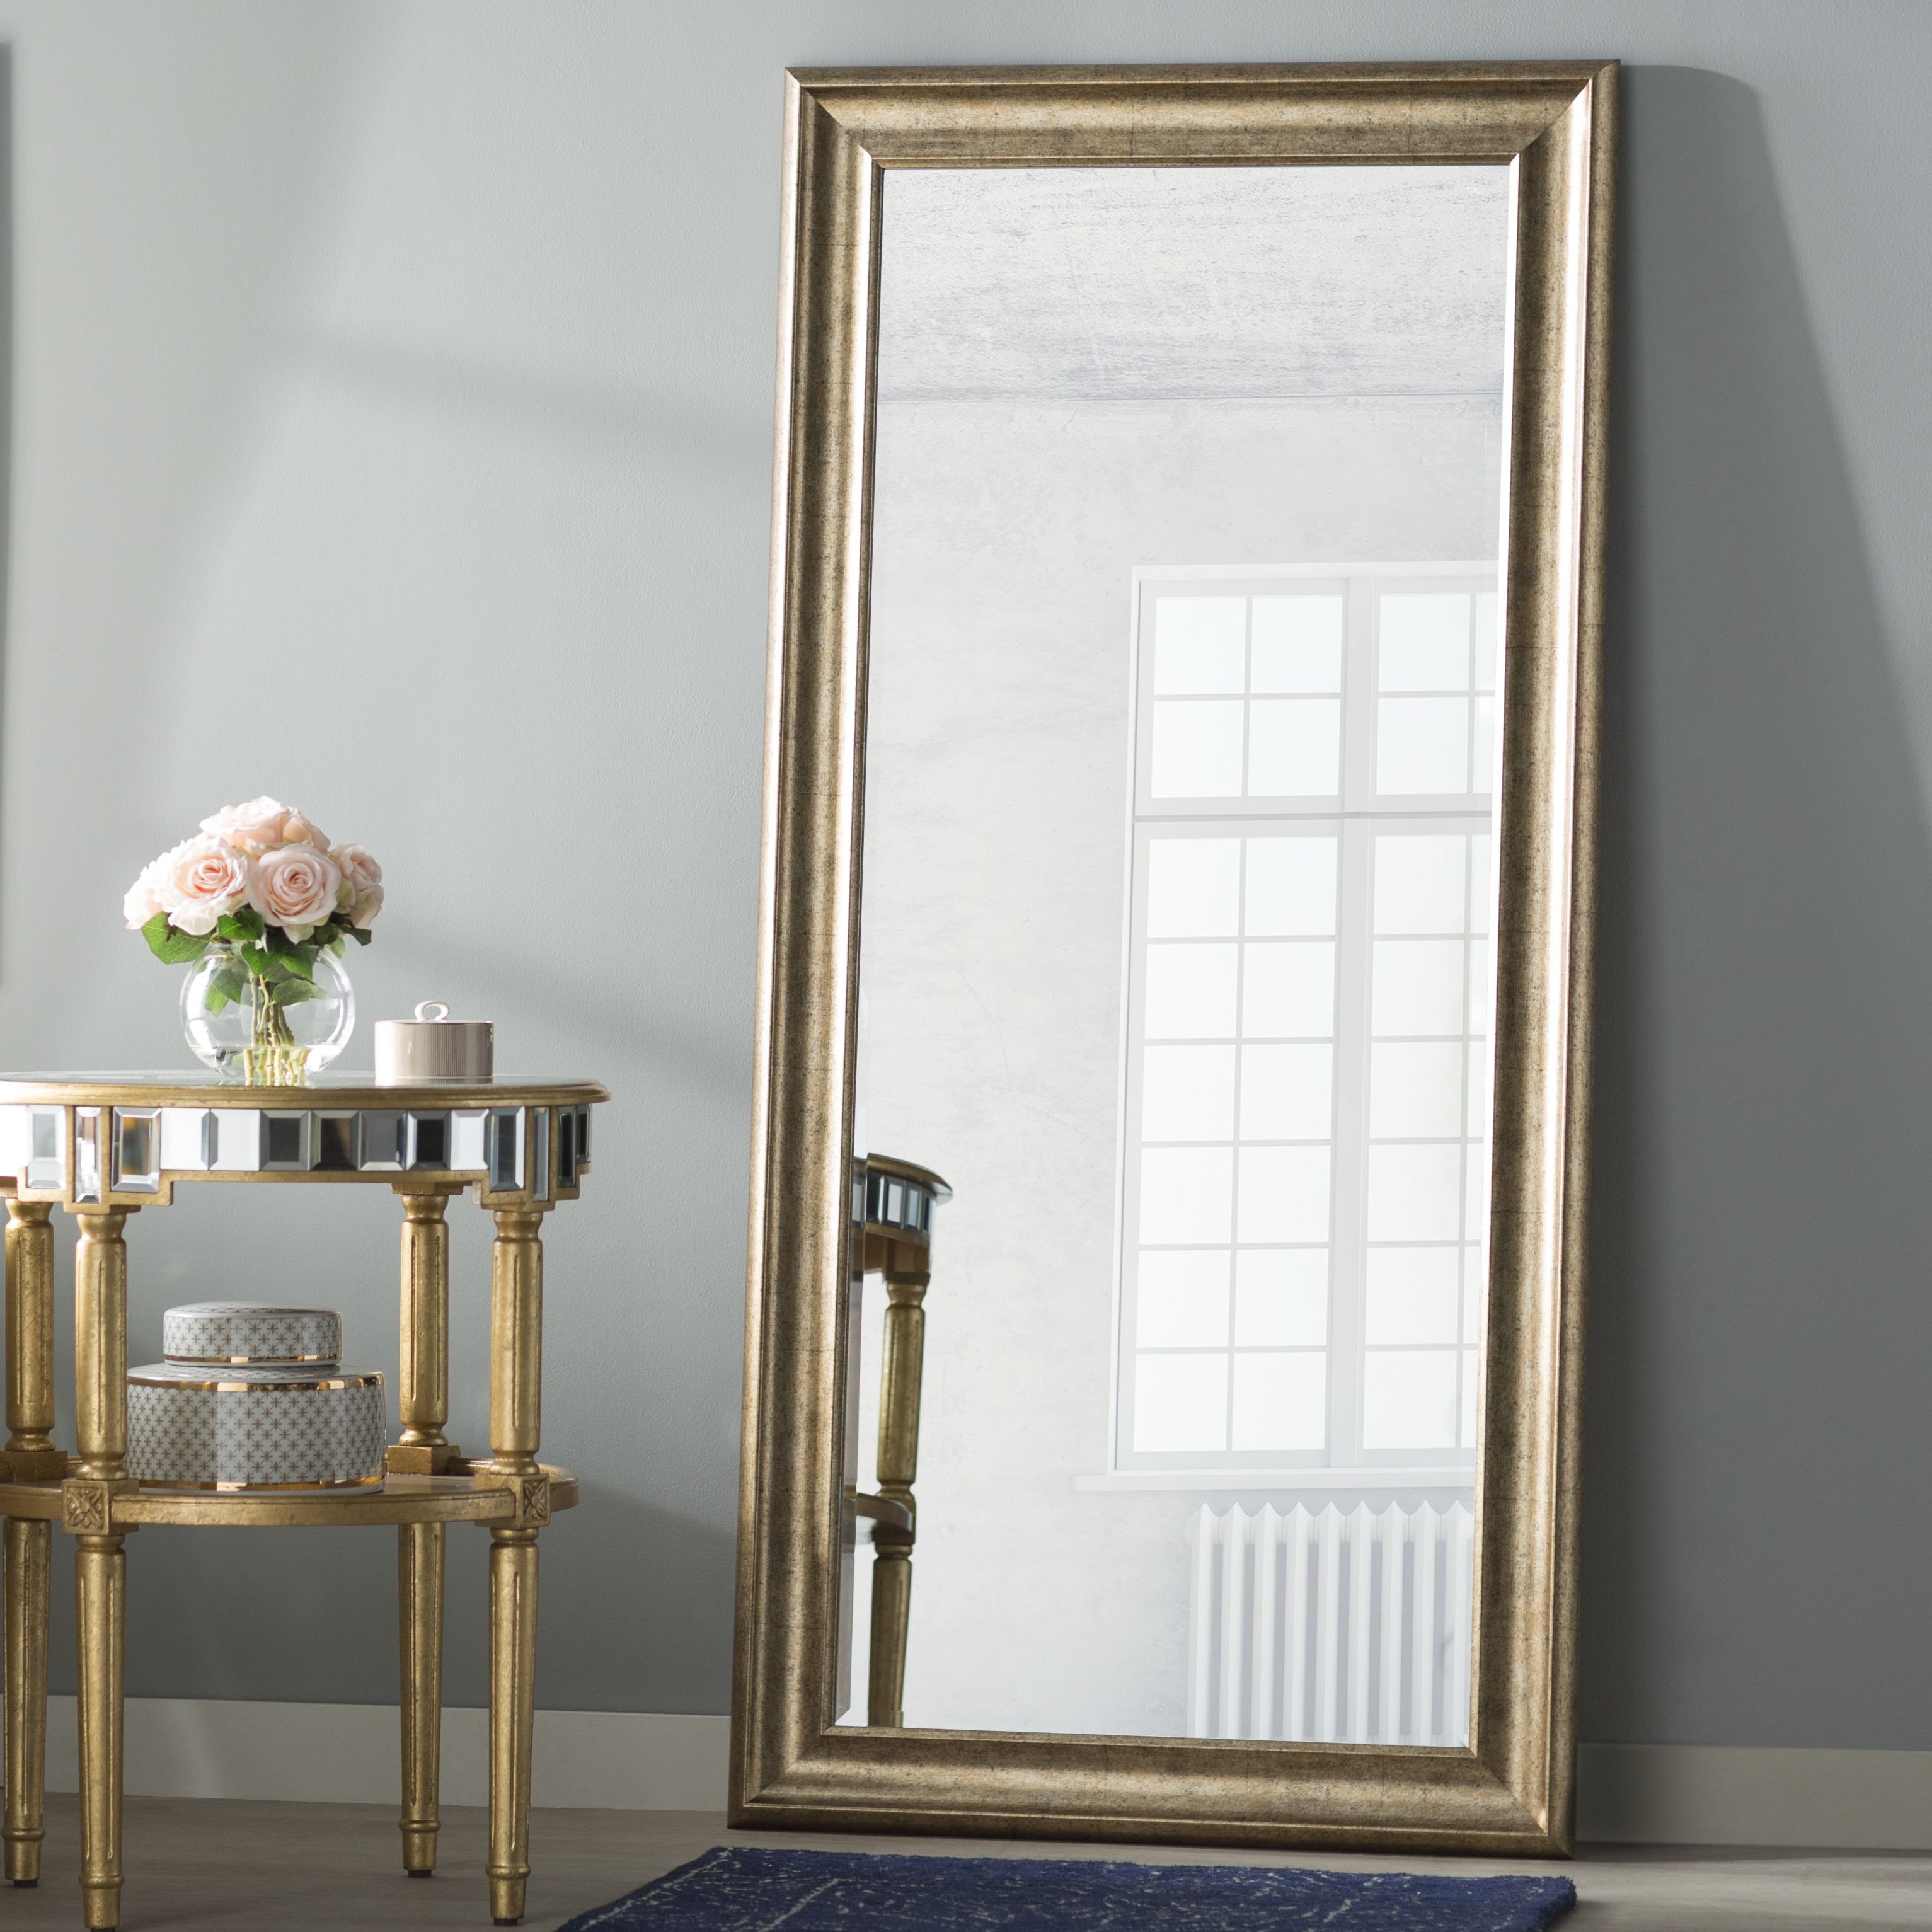 Northcutt Full Length Mirror Pertaining To Newest Hogge Modern Brushed Nickel Large Frame Wall Mirrors (View 3 of 20)